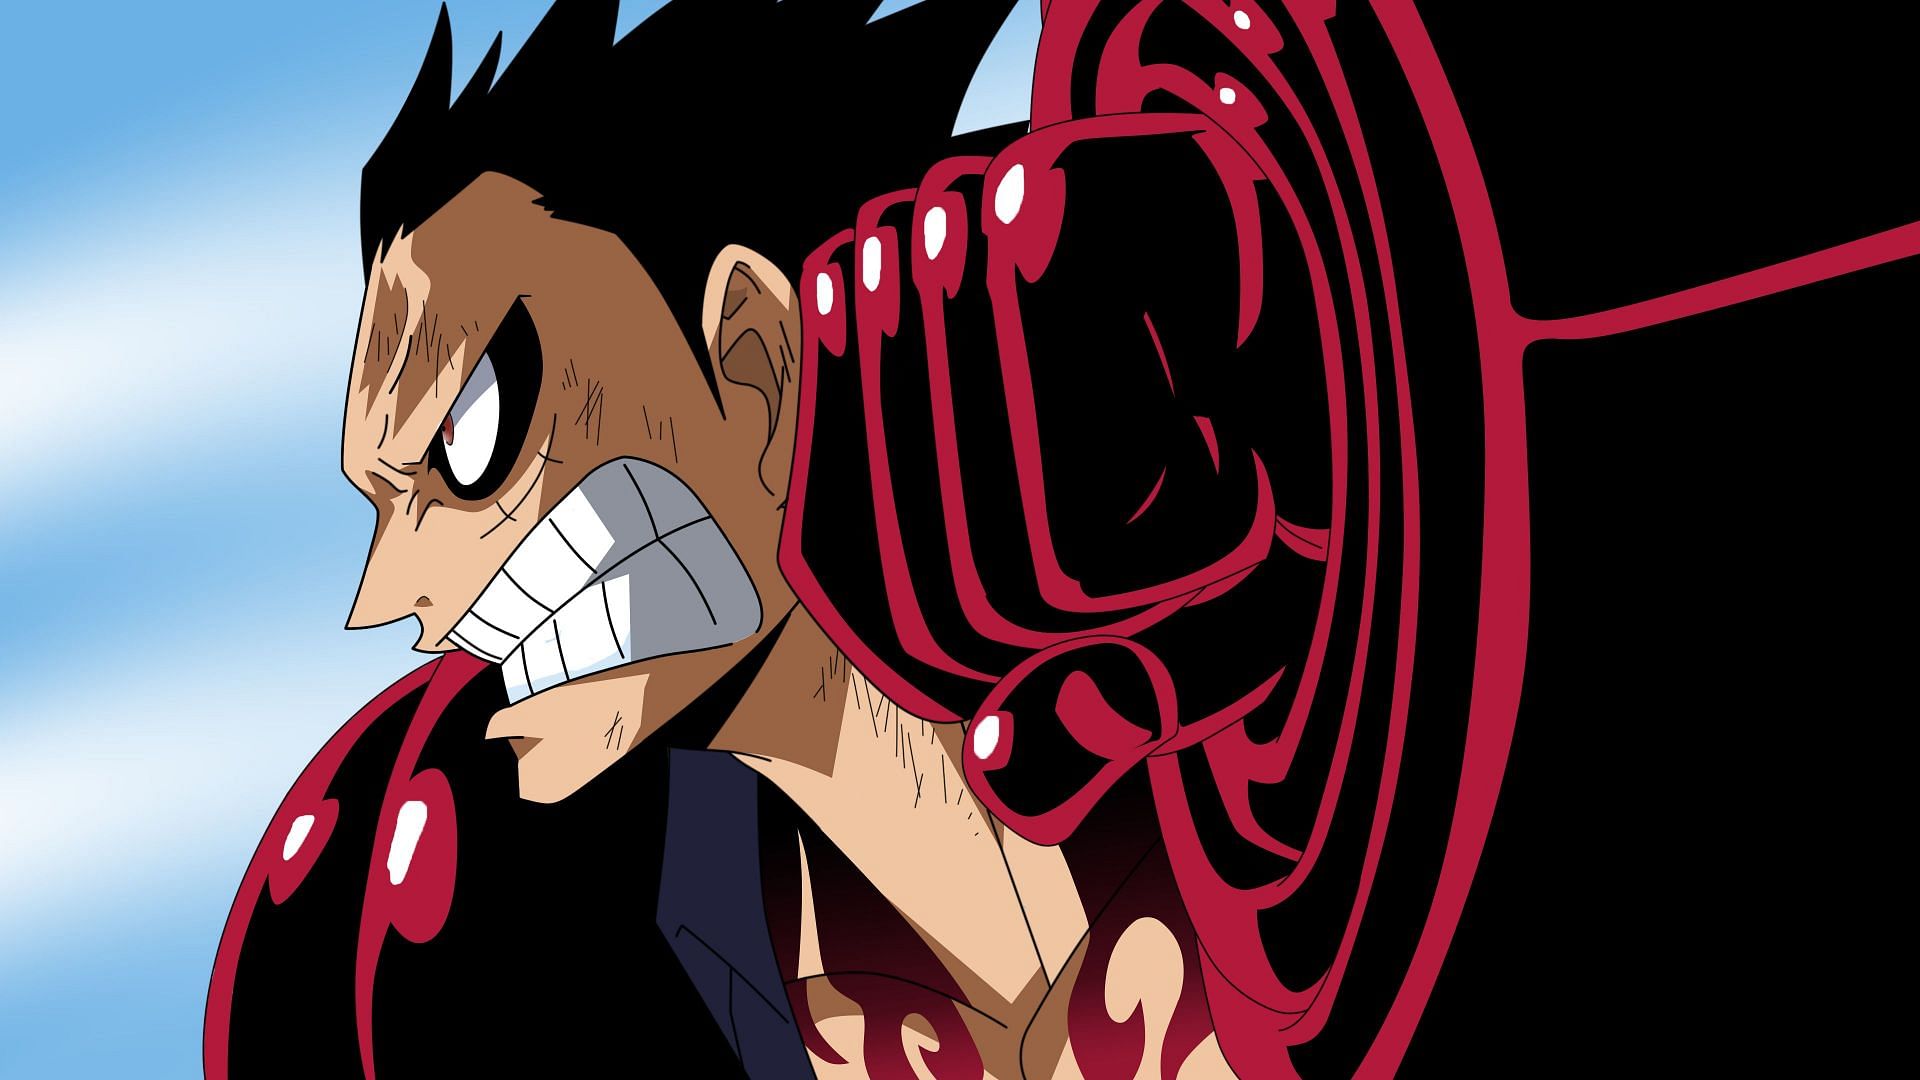 Monkey D. Luffy using Gear 4th in One Piece (Image via Toei Animation)